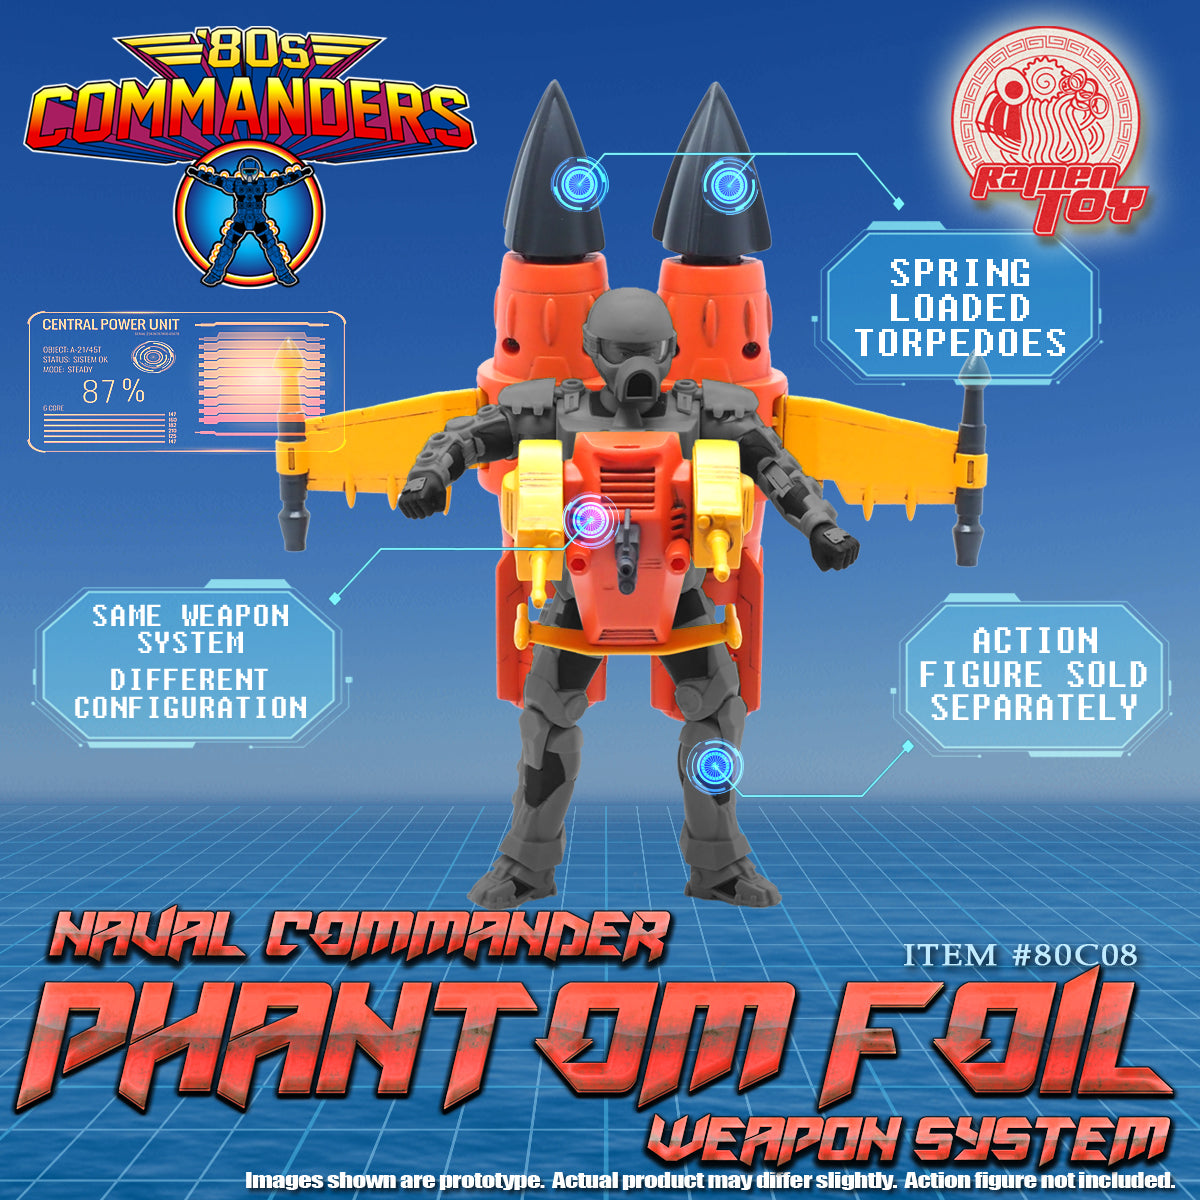 ITEM #80C08 - 80s Commanders [NAVAL COMMANDER PHANTOM FOIL WEAPON SYSTEM] (PRE-ORDER) Exclude Shipping #SpecialPrice